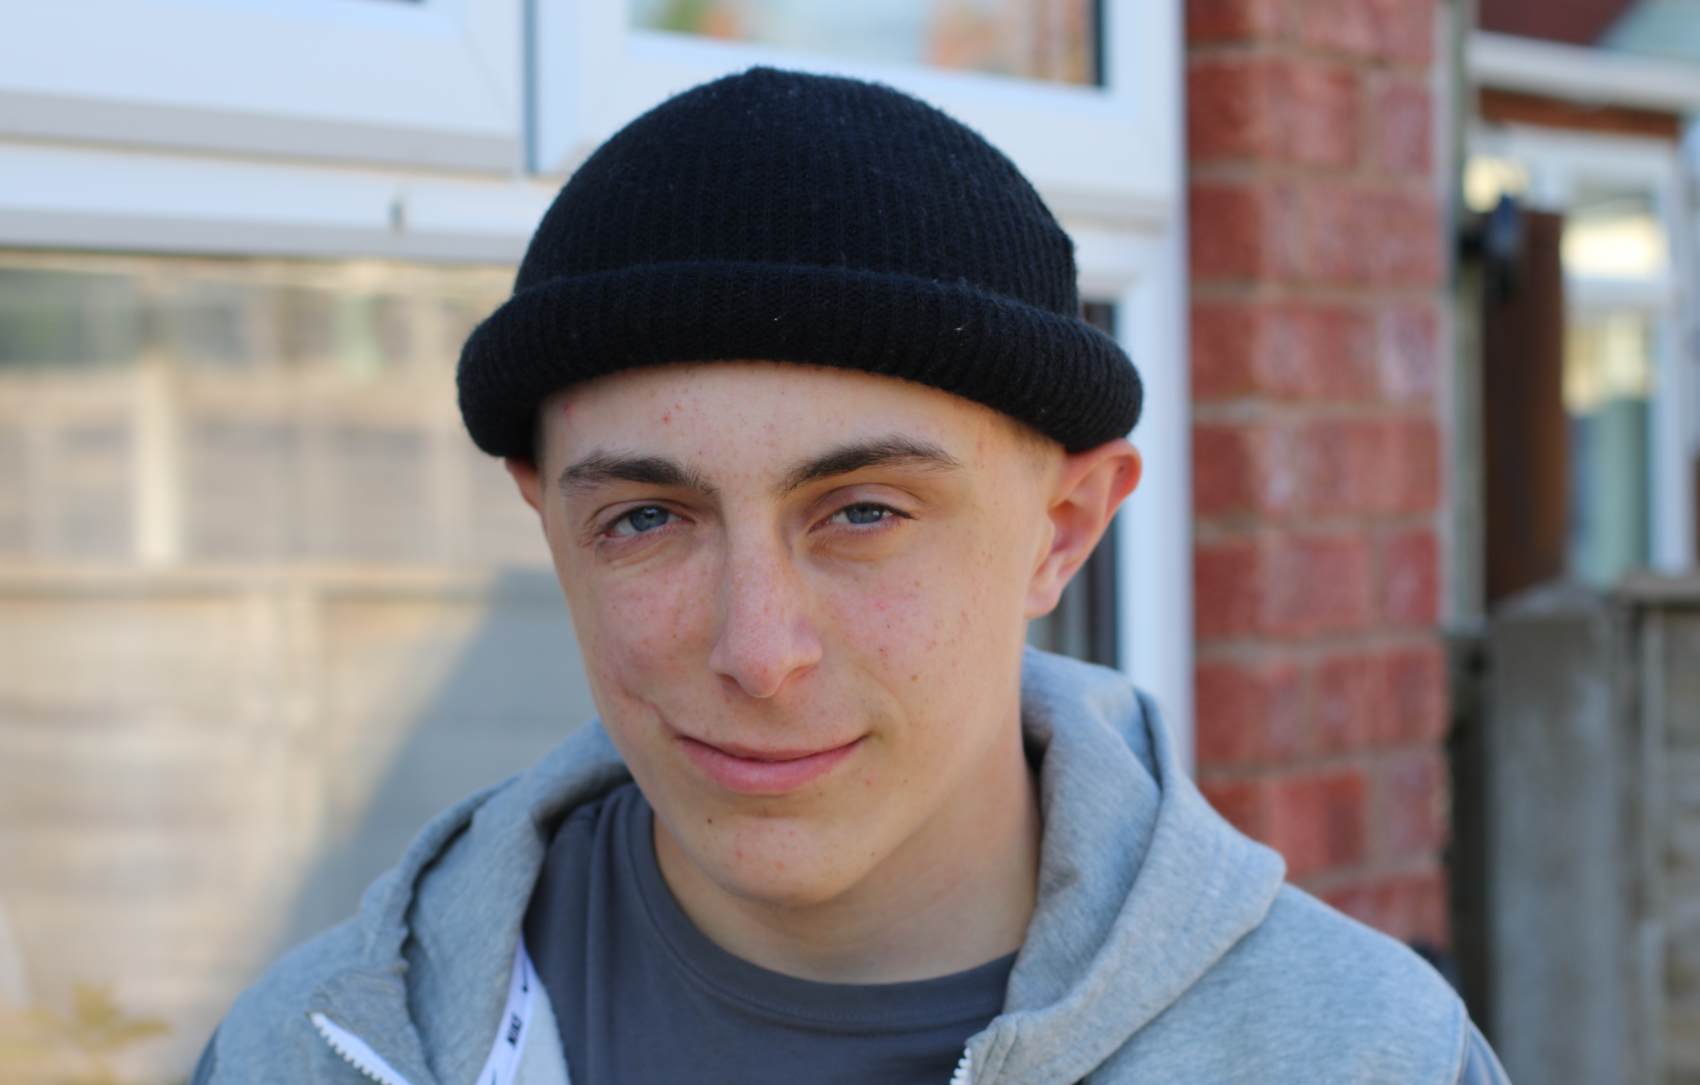 Marcus, who has facial scars on the right side of his face, wearing a black hat and grey hoodie, looks towards the camera with a slight smile